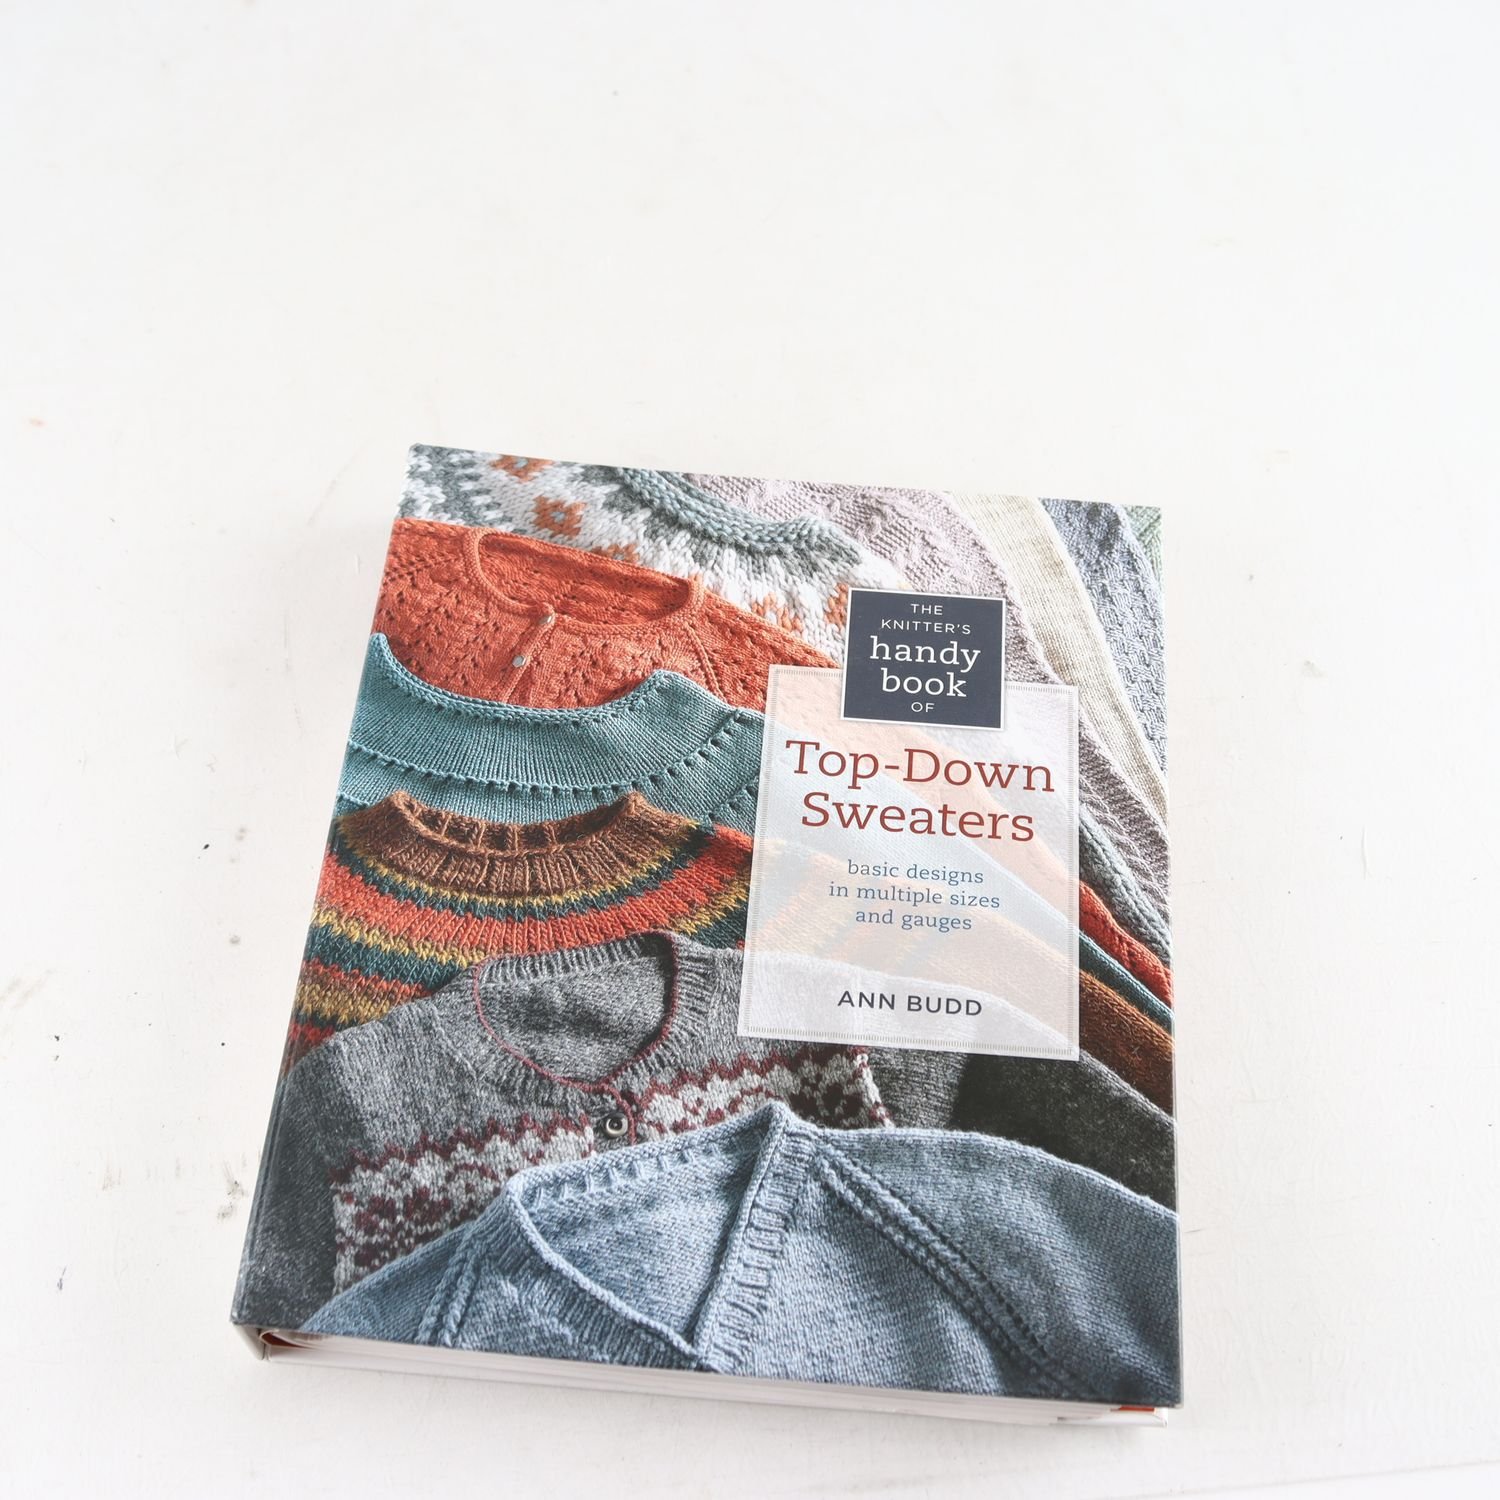 The Knitter´s Handy Book of Top-Down Sweaters, Ann Budd